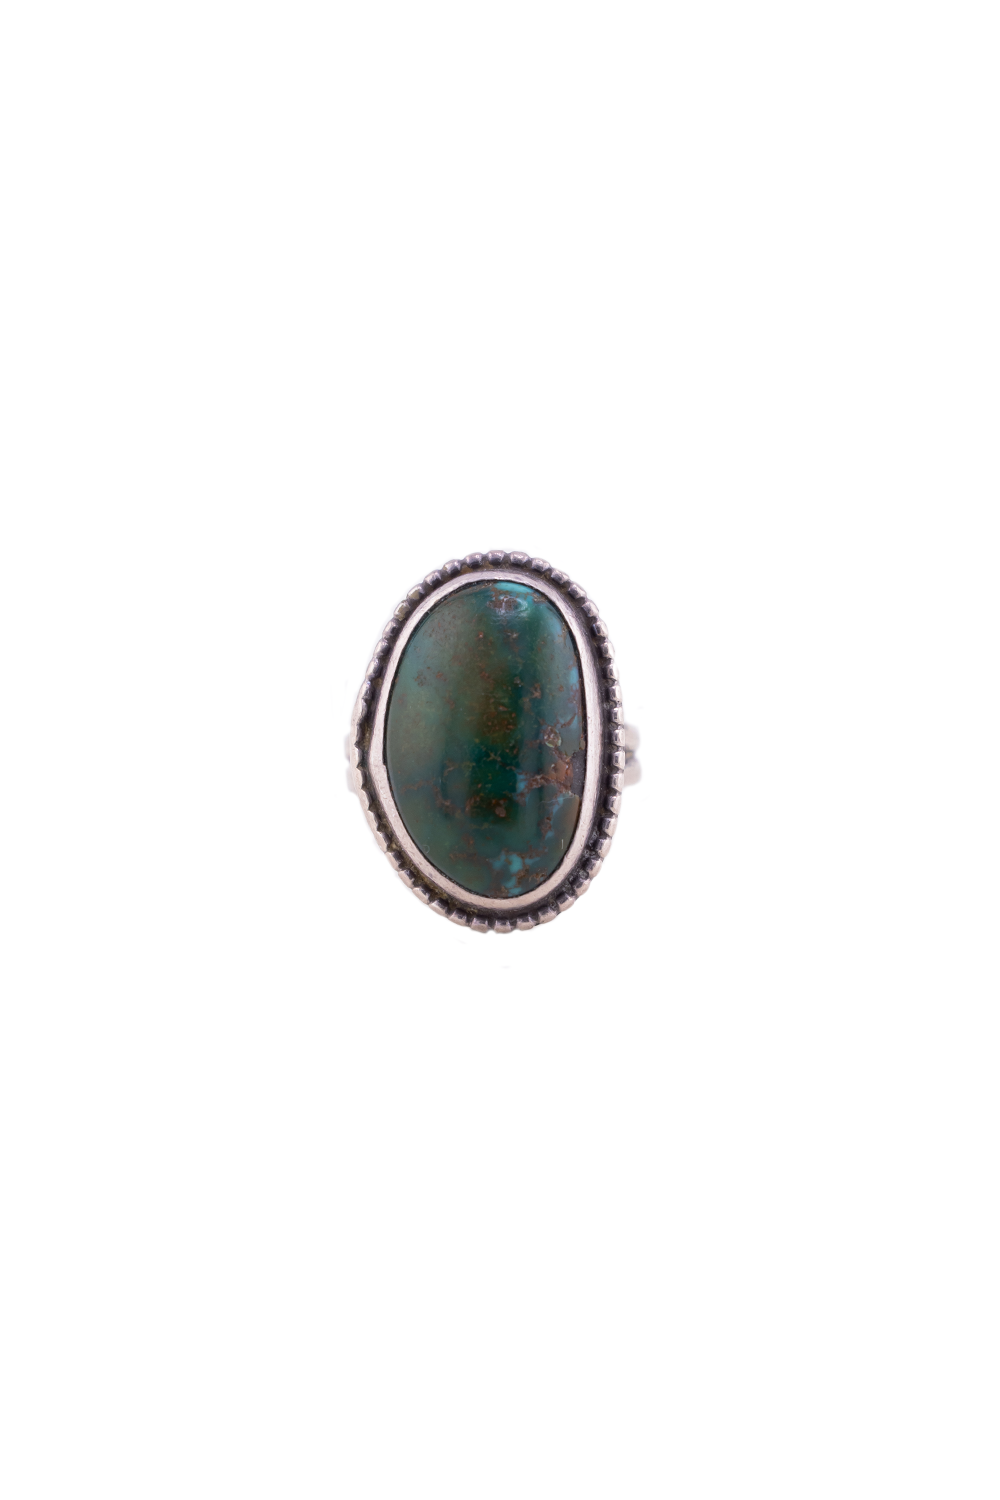 Pawn Southwestern Sterling Cerrillos Turquoise s5.75 Rings